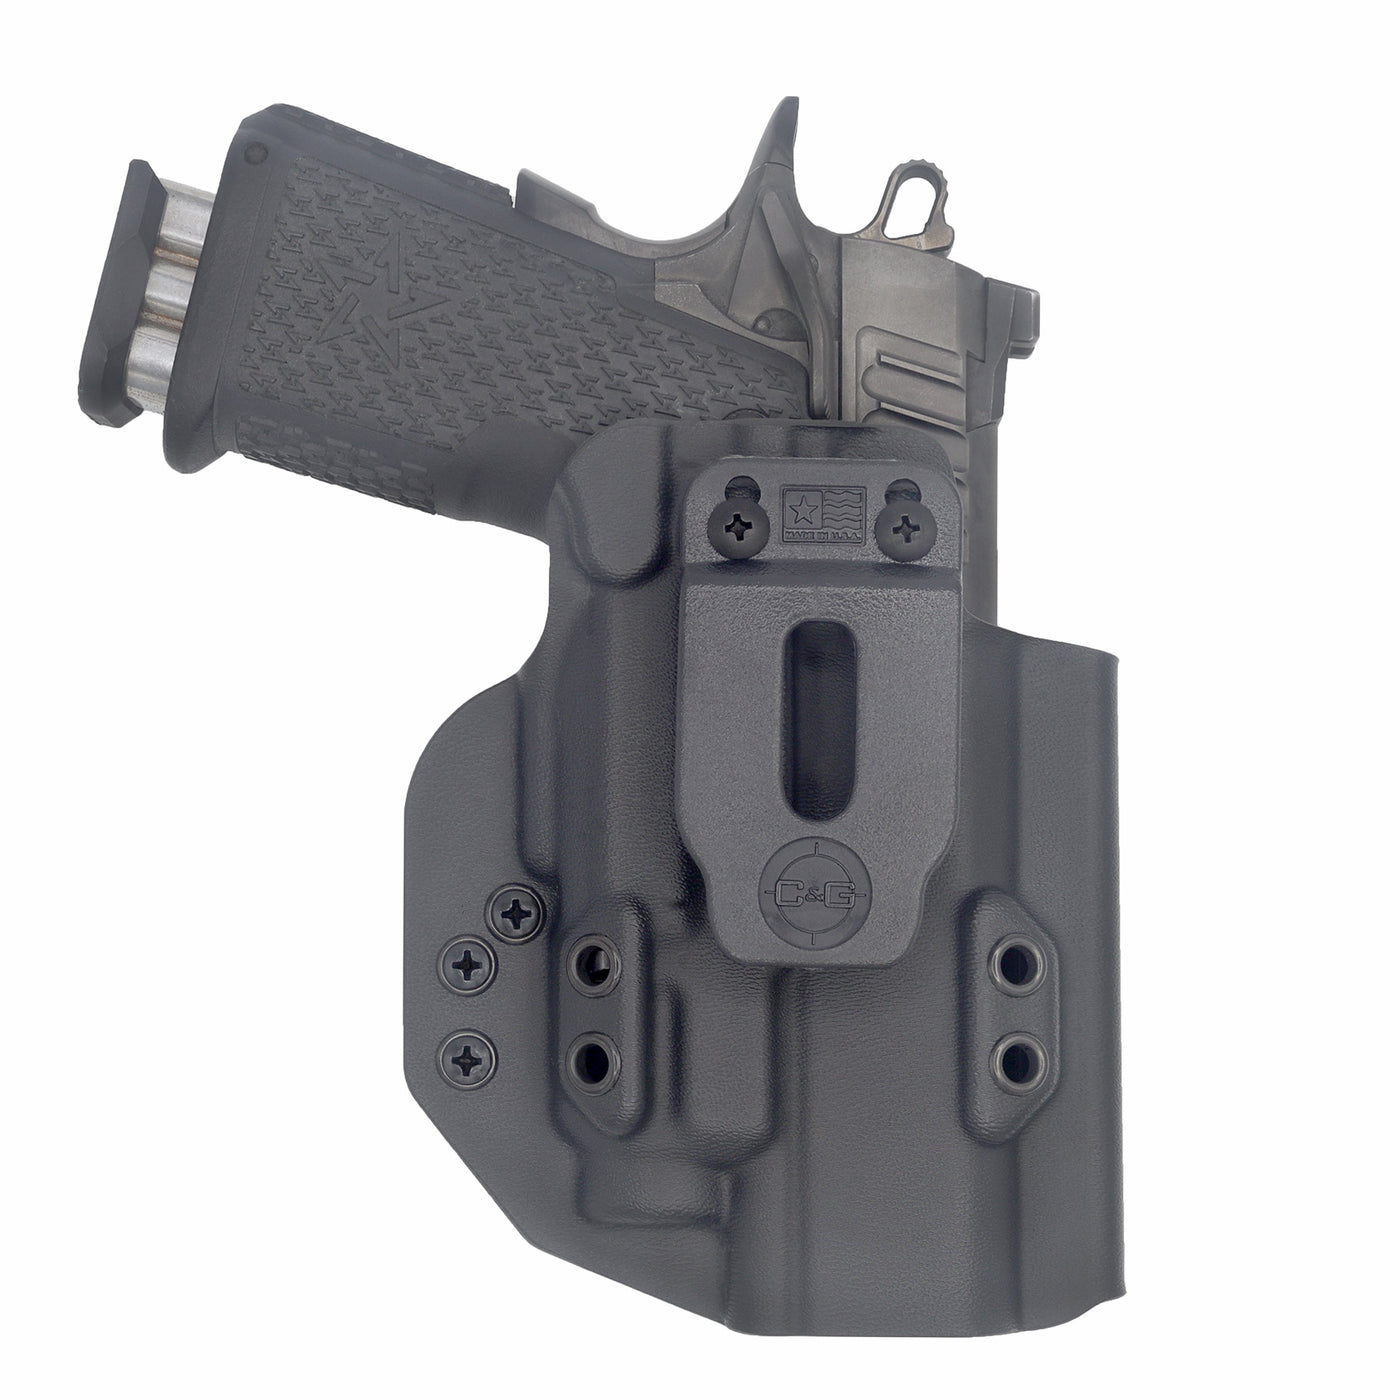 C&G Holsters Quickship IWB Tactical 2011 Streamlight TLR7/a in holstered position